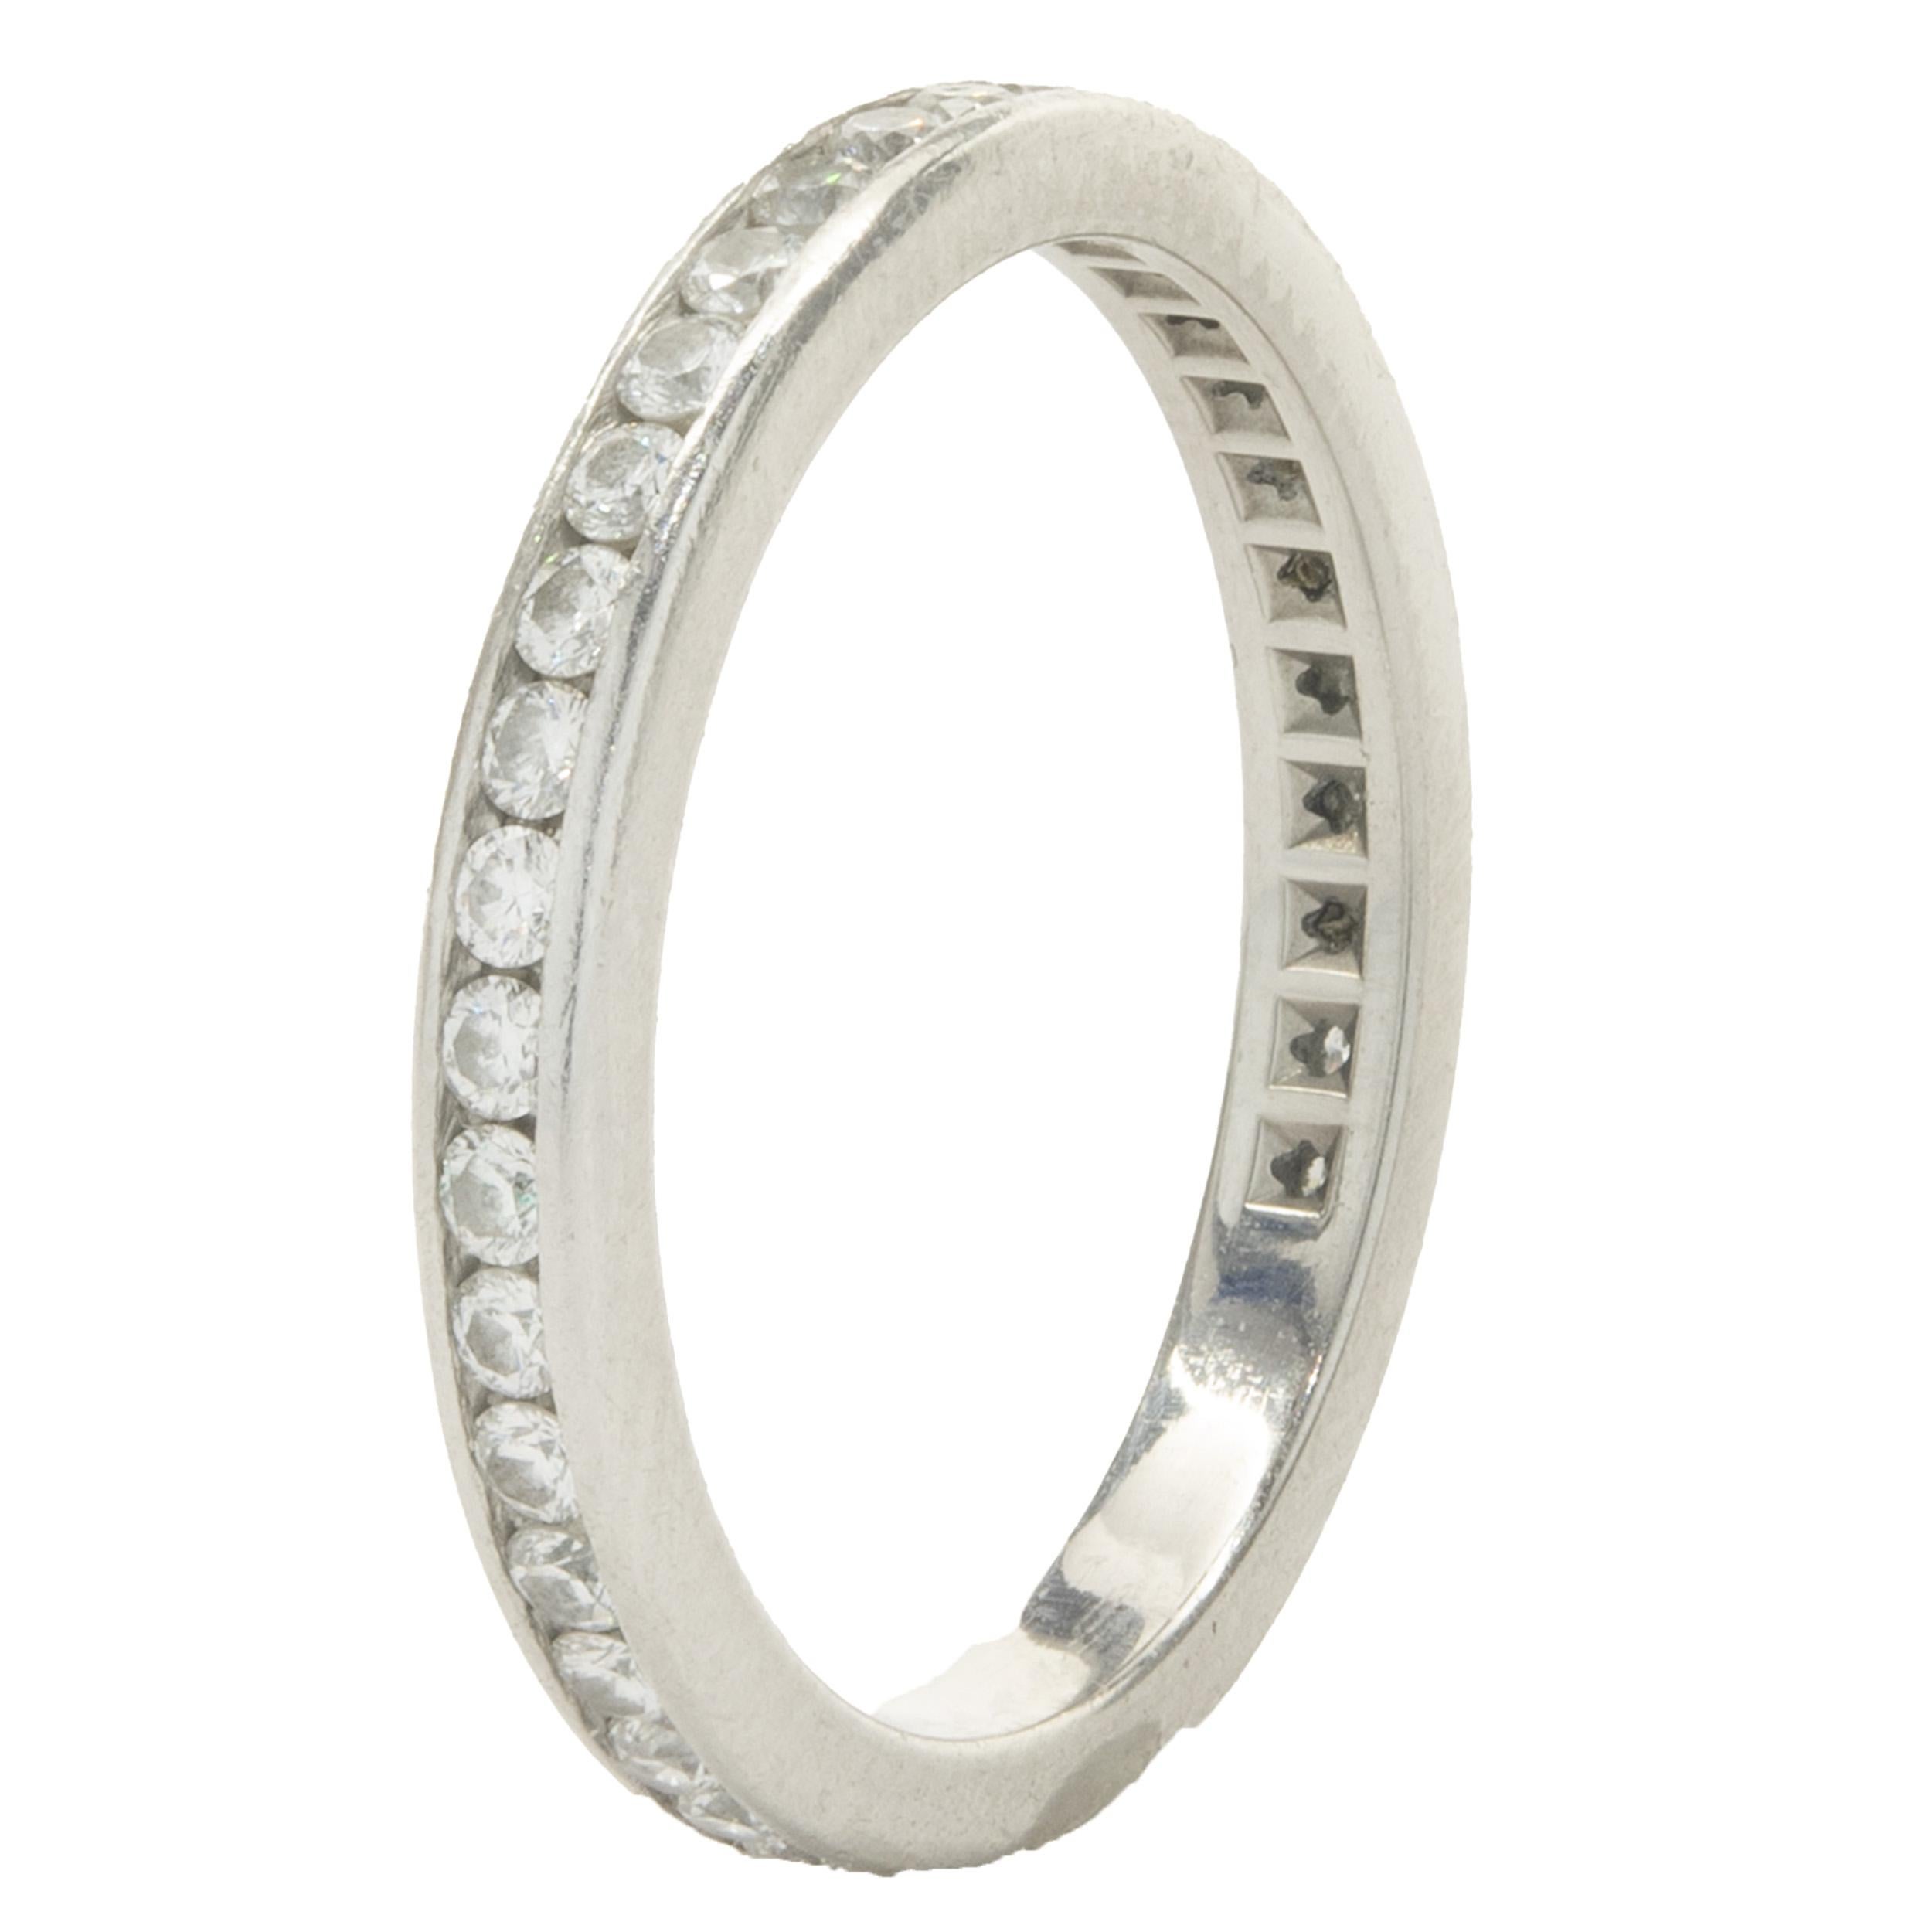 Tiffany & Co. Platinum Channel Set Diamond Eternity Band In Excellent Condition For Sale In Scottsdale, AZ